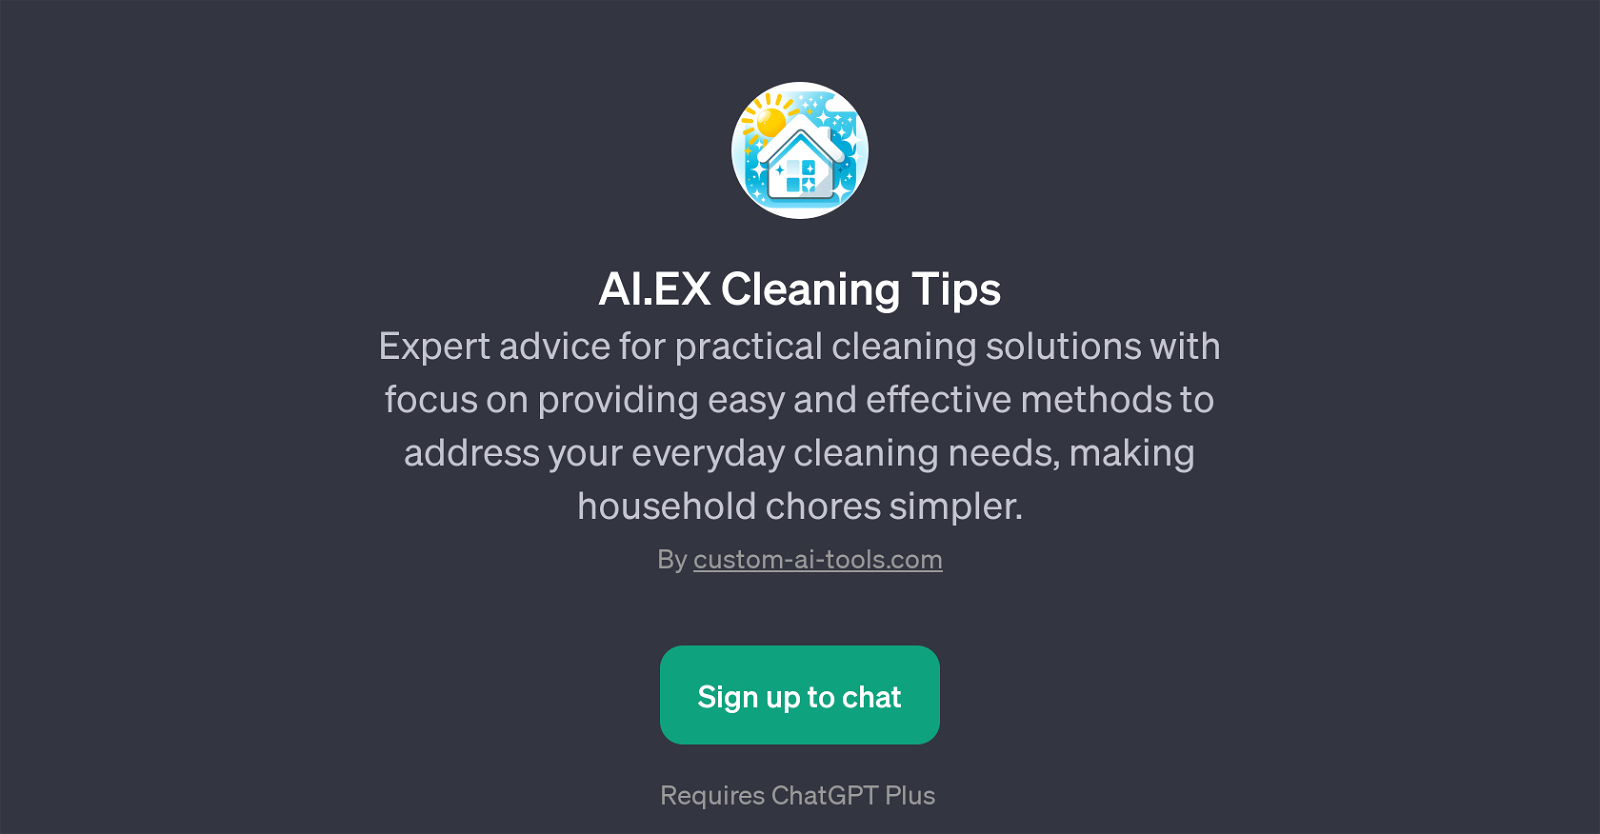 AI.EX Cleaning Tips website